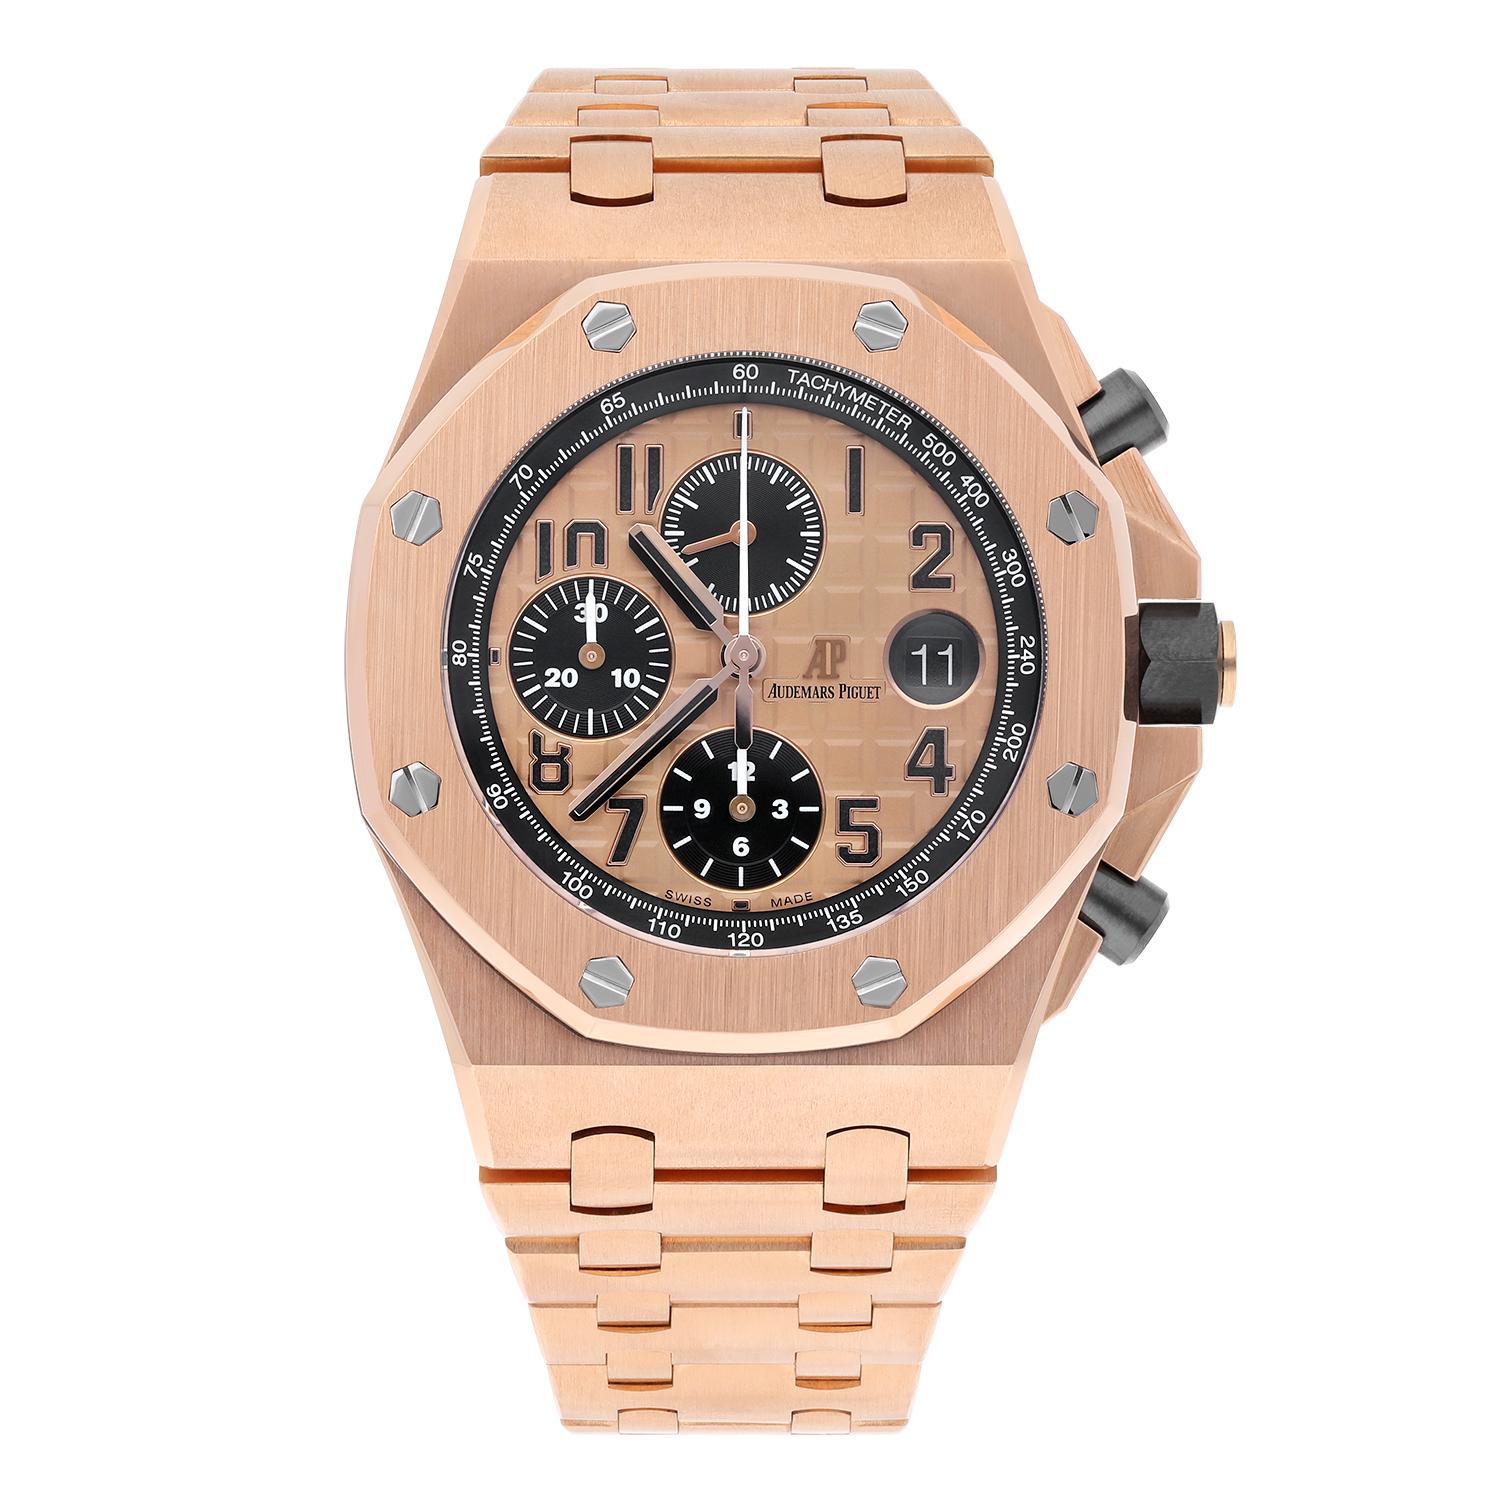 Introducing the Audemars Piguet Royal Oak Offshore Chronograph 26470OR.OO.1000OR.01 – an exquisite timepiece meticulously crafted in 18kt rose gold, complete with its original box and papers. In an impeccable mint condition, this watch epitomizes